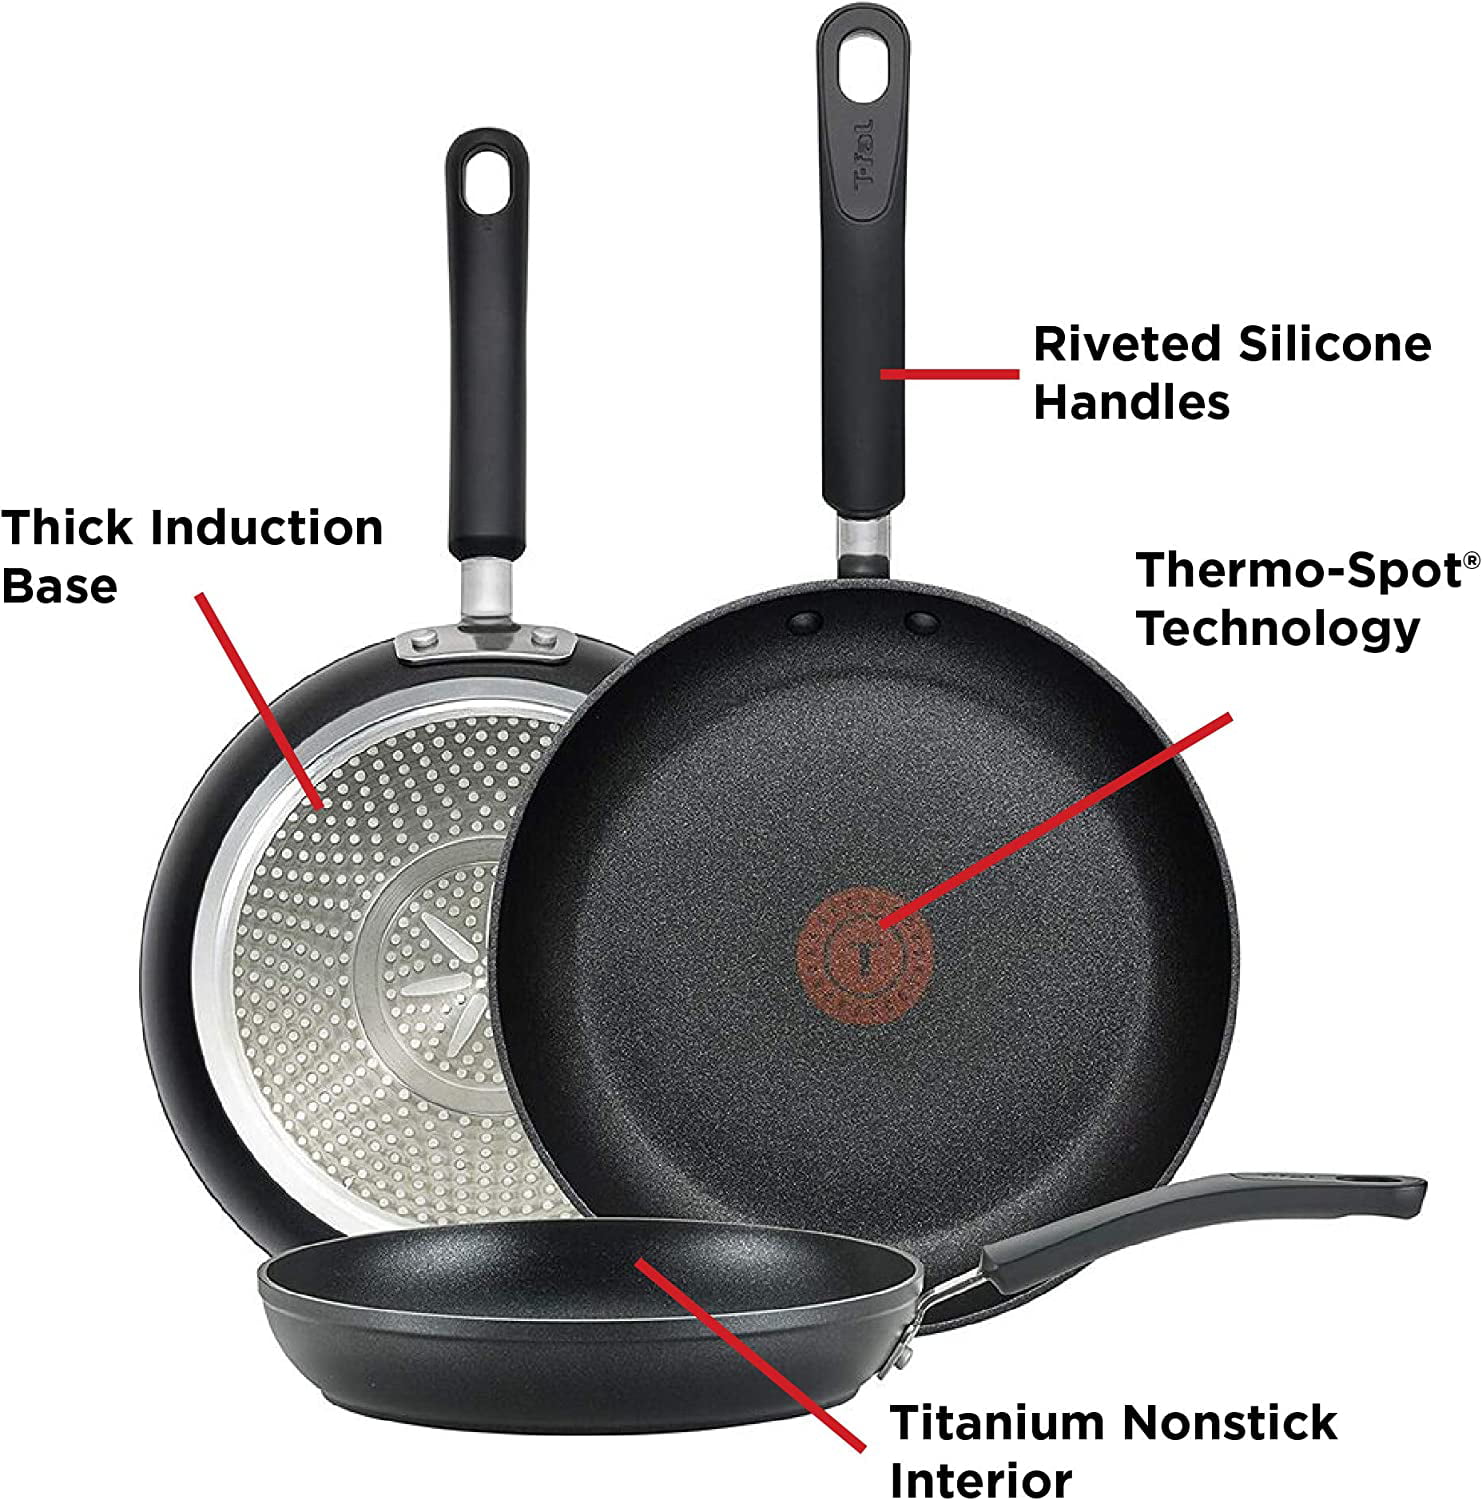 zuur Krimpen Phalanx E938S3 Professional Total Nonstick Thermo-Spot Heat Indicator Fry Pan  Cookware Set, 3-Piece, 8-Inch 10.5-Inch and 12.5-Inch, Black - Walmart.com